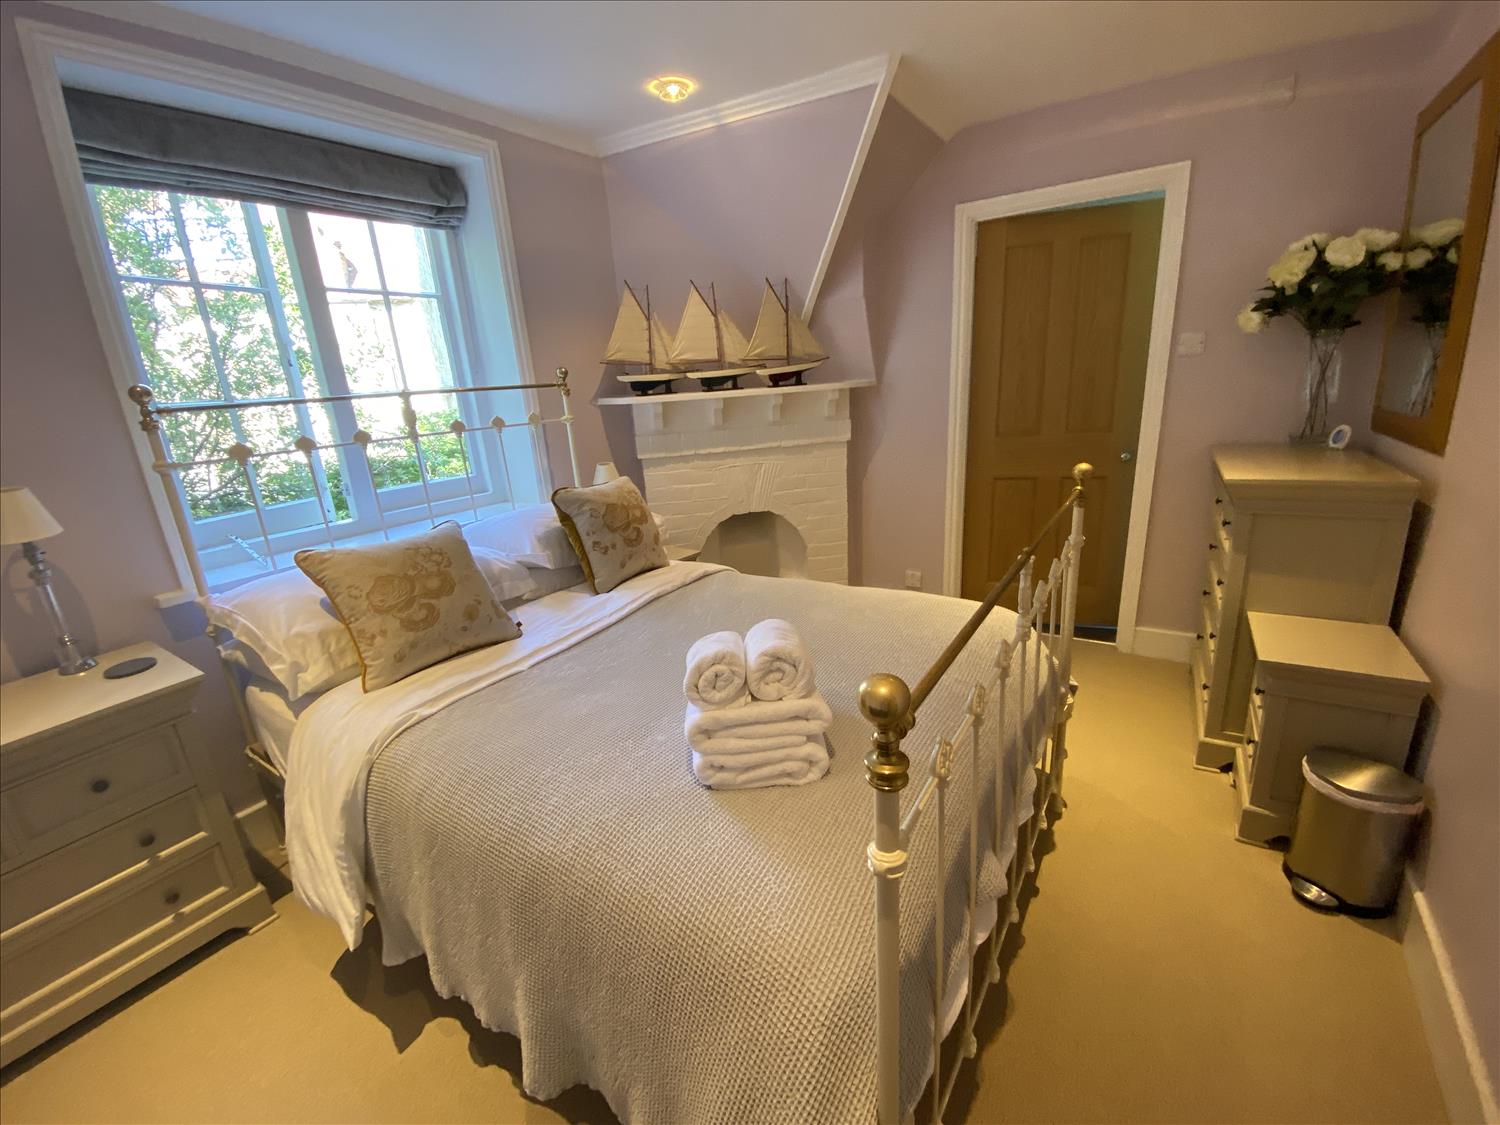 Isle of Wight cottage holiday with double bed and en-suite bathrooms